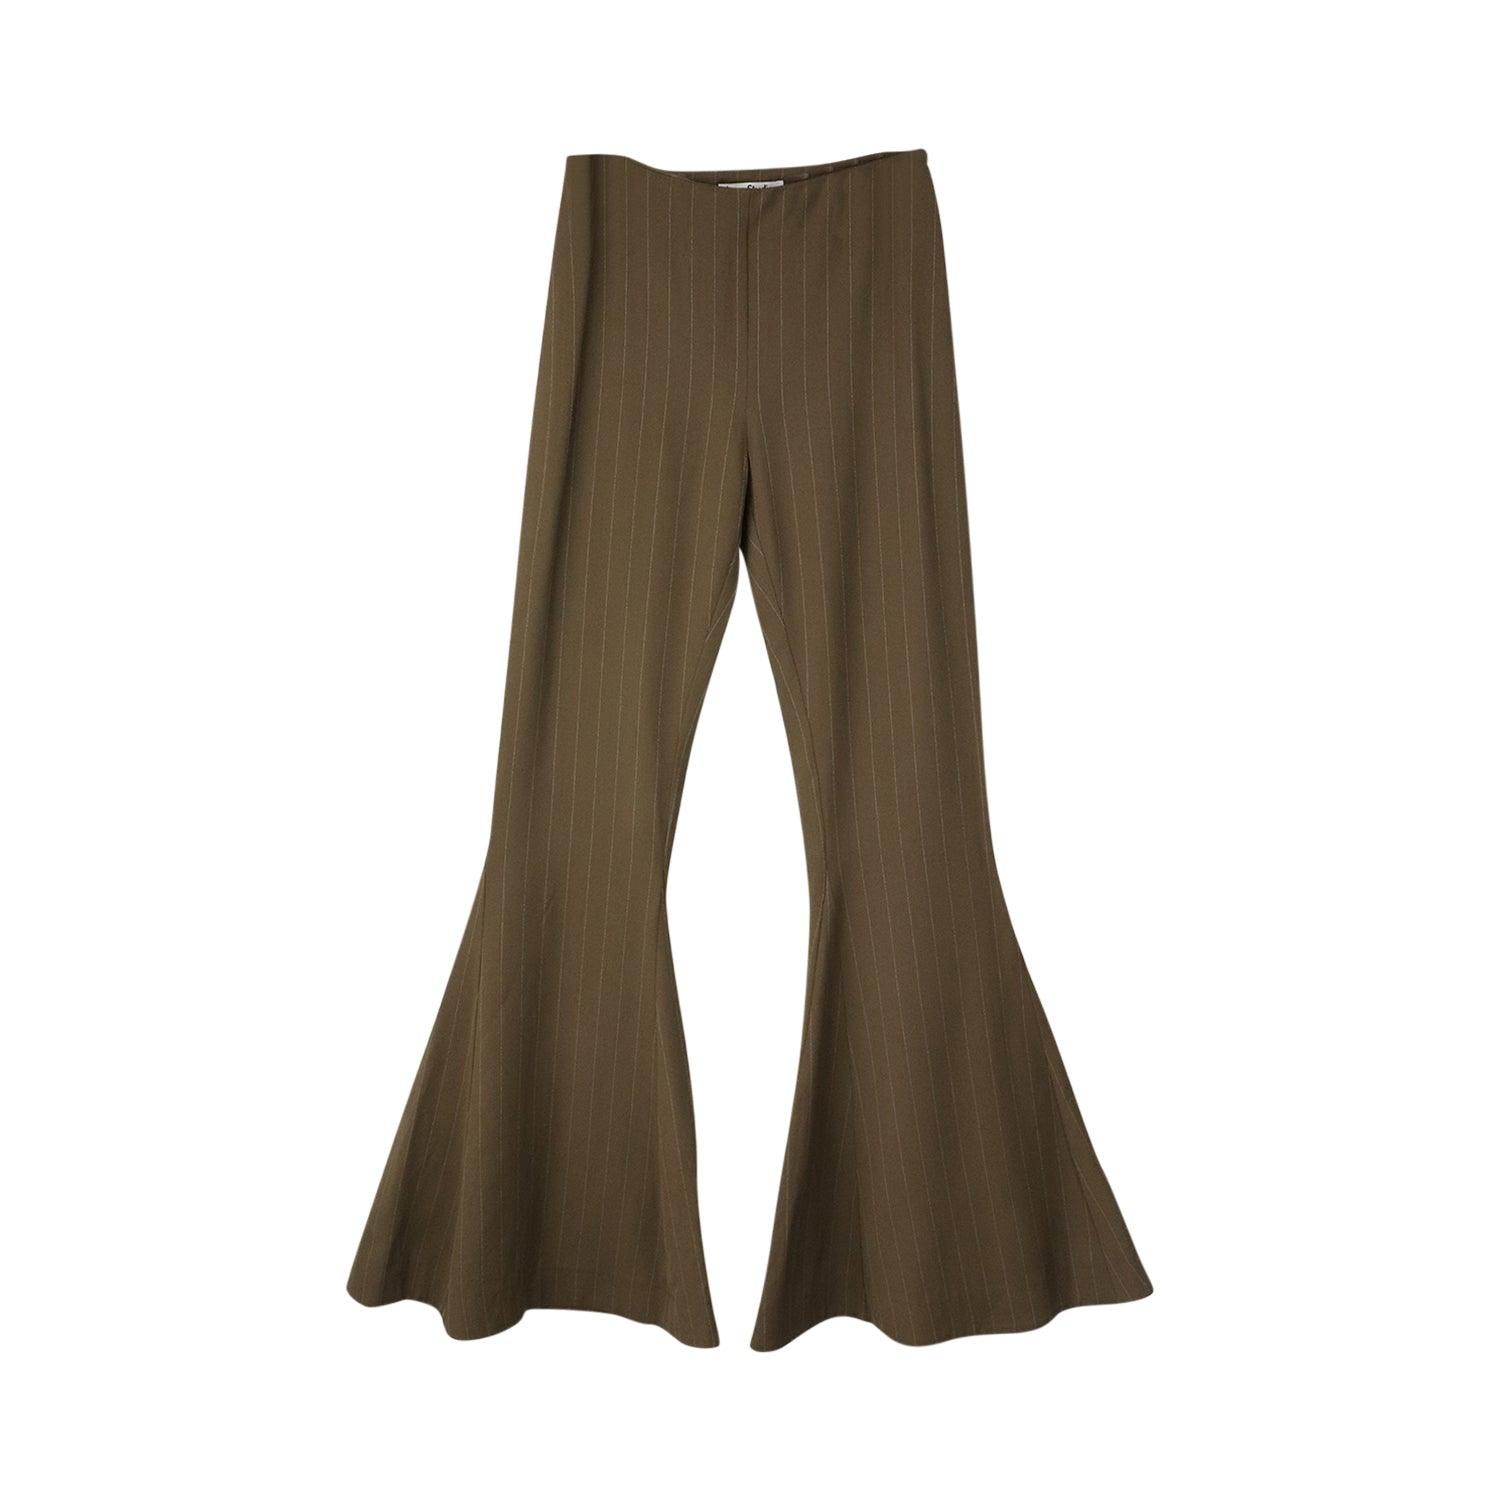 Acne Studios Trousers - Women's 34 - Fashionably Yours